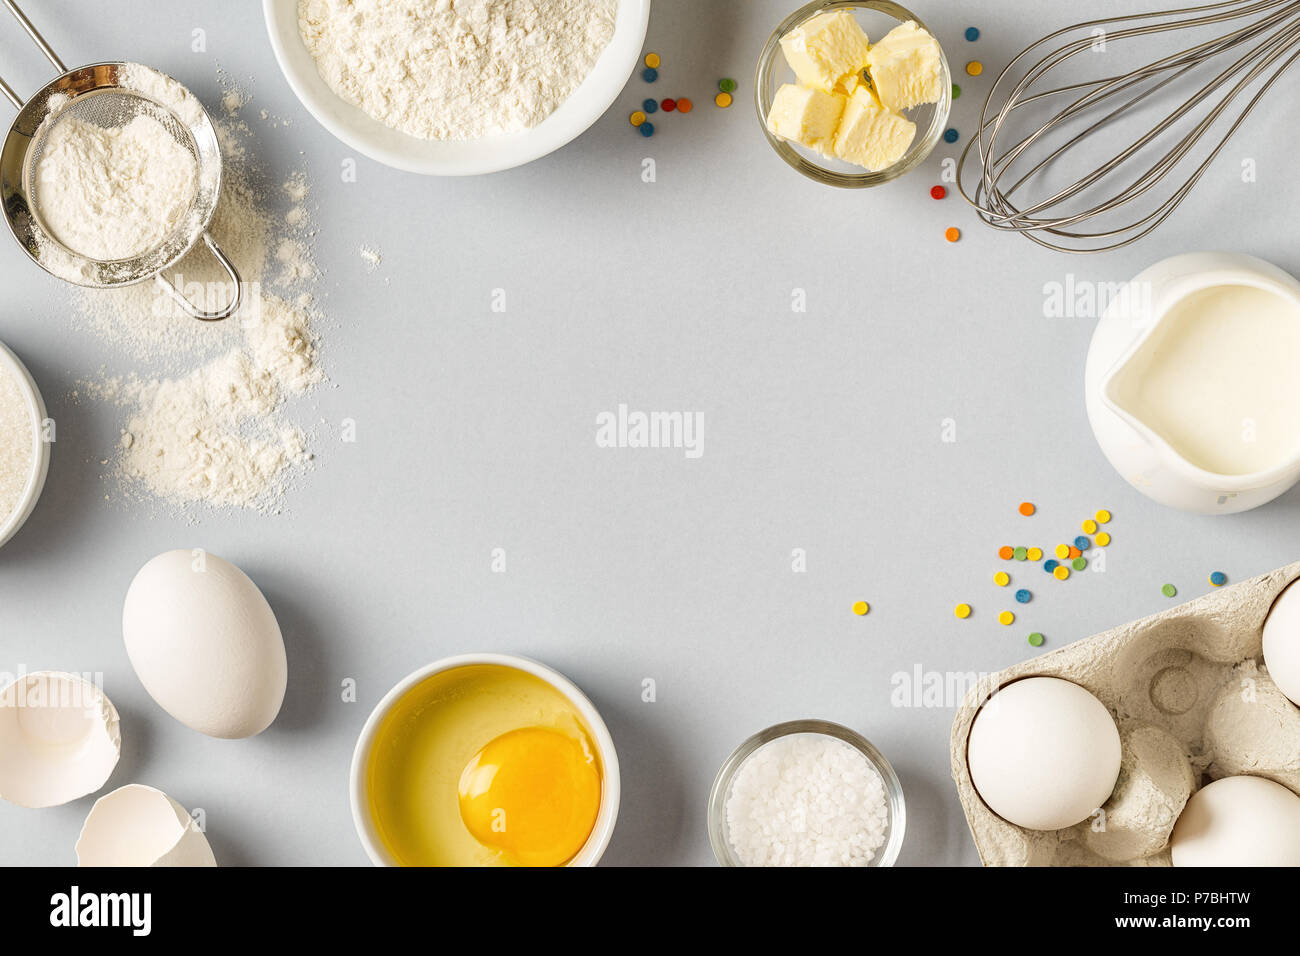 Background with ingredients for cooking, baking, flat lay, top view. Stock Photo